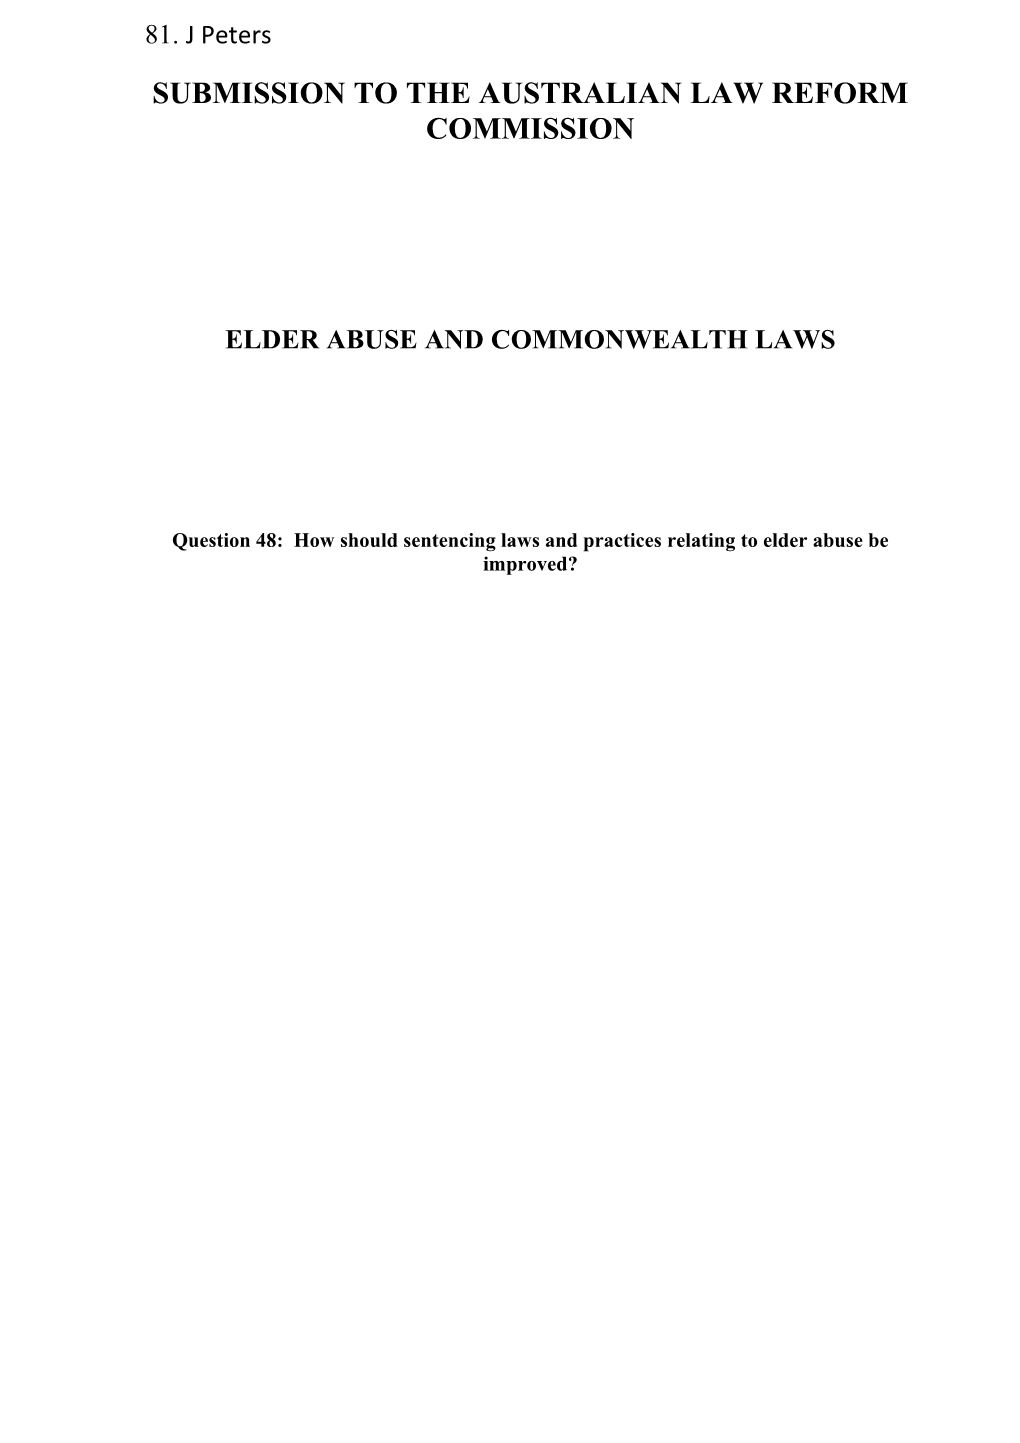 Submission to the Australian Law Reform Commission